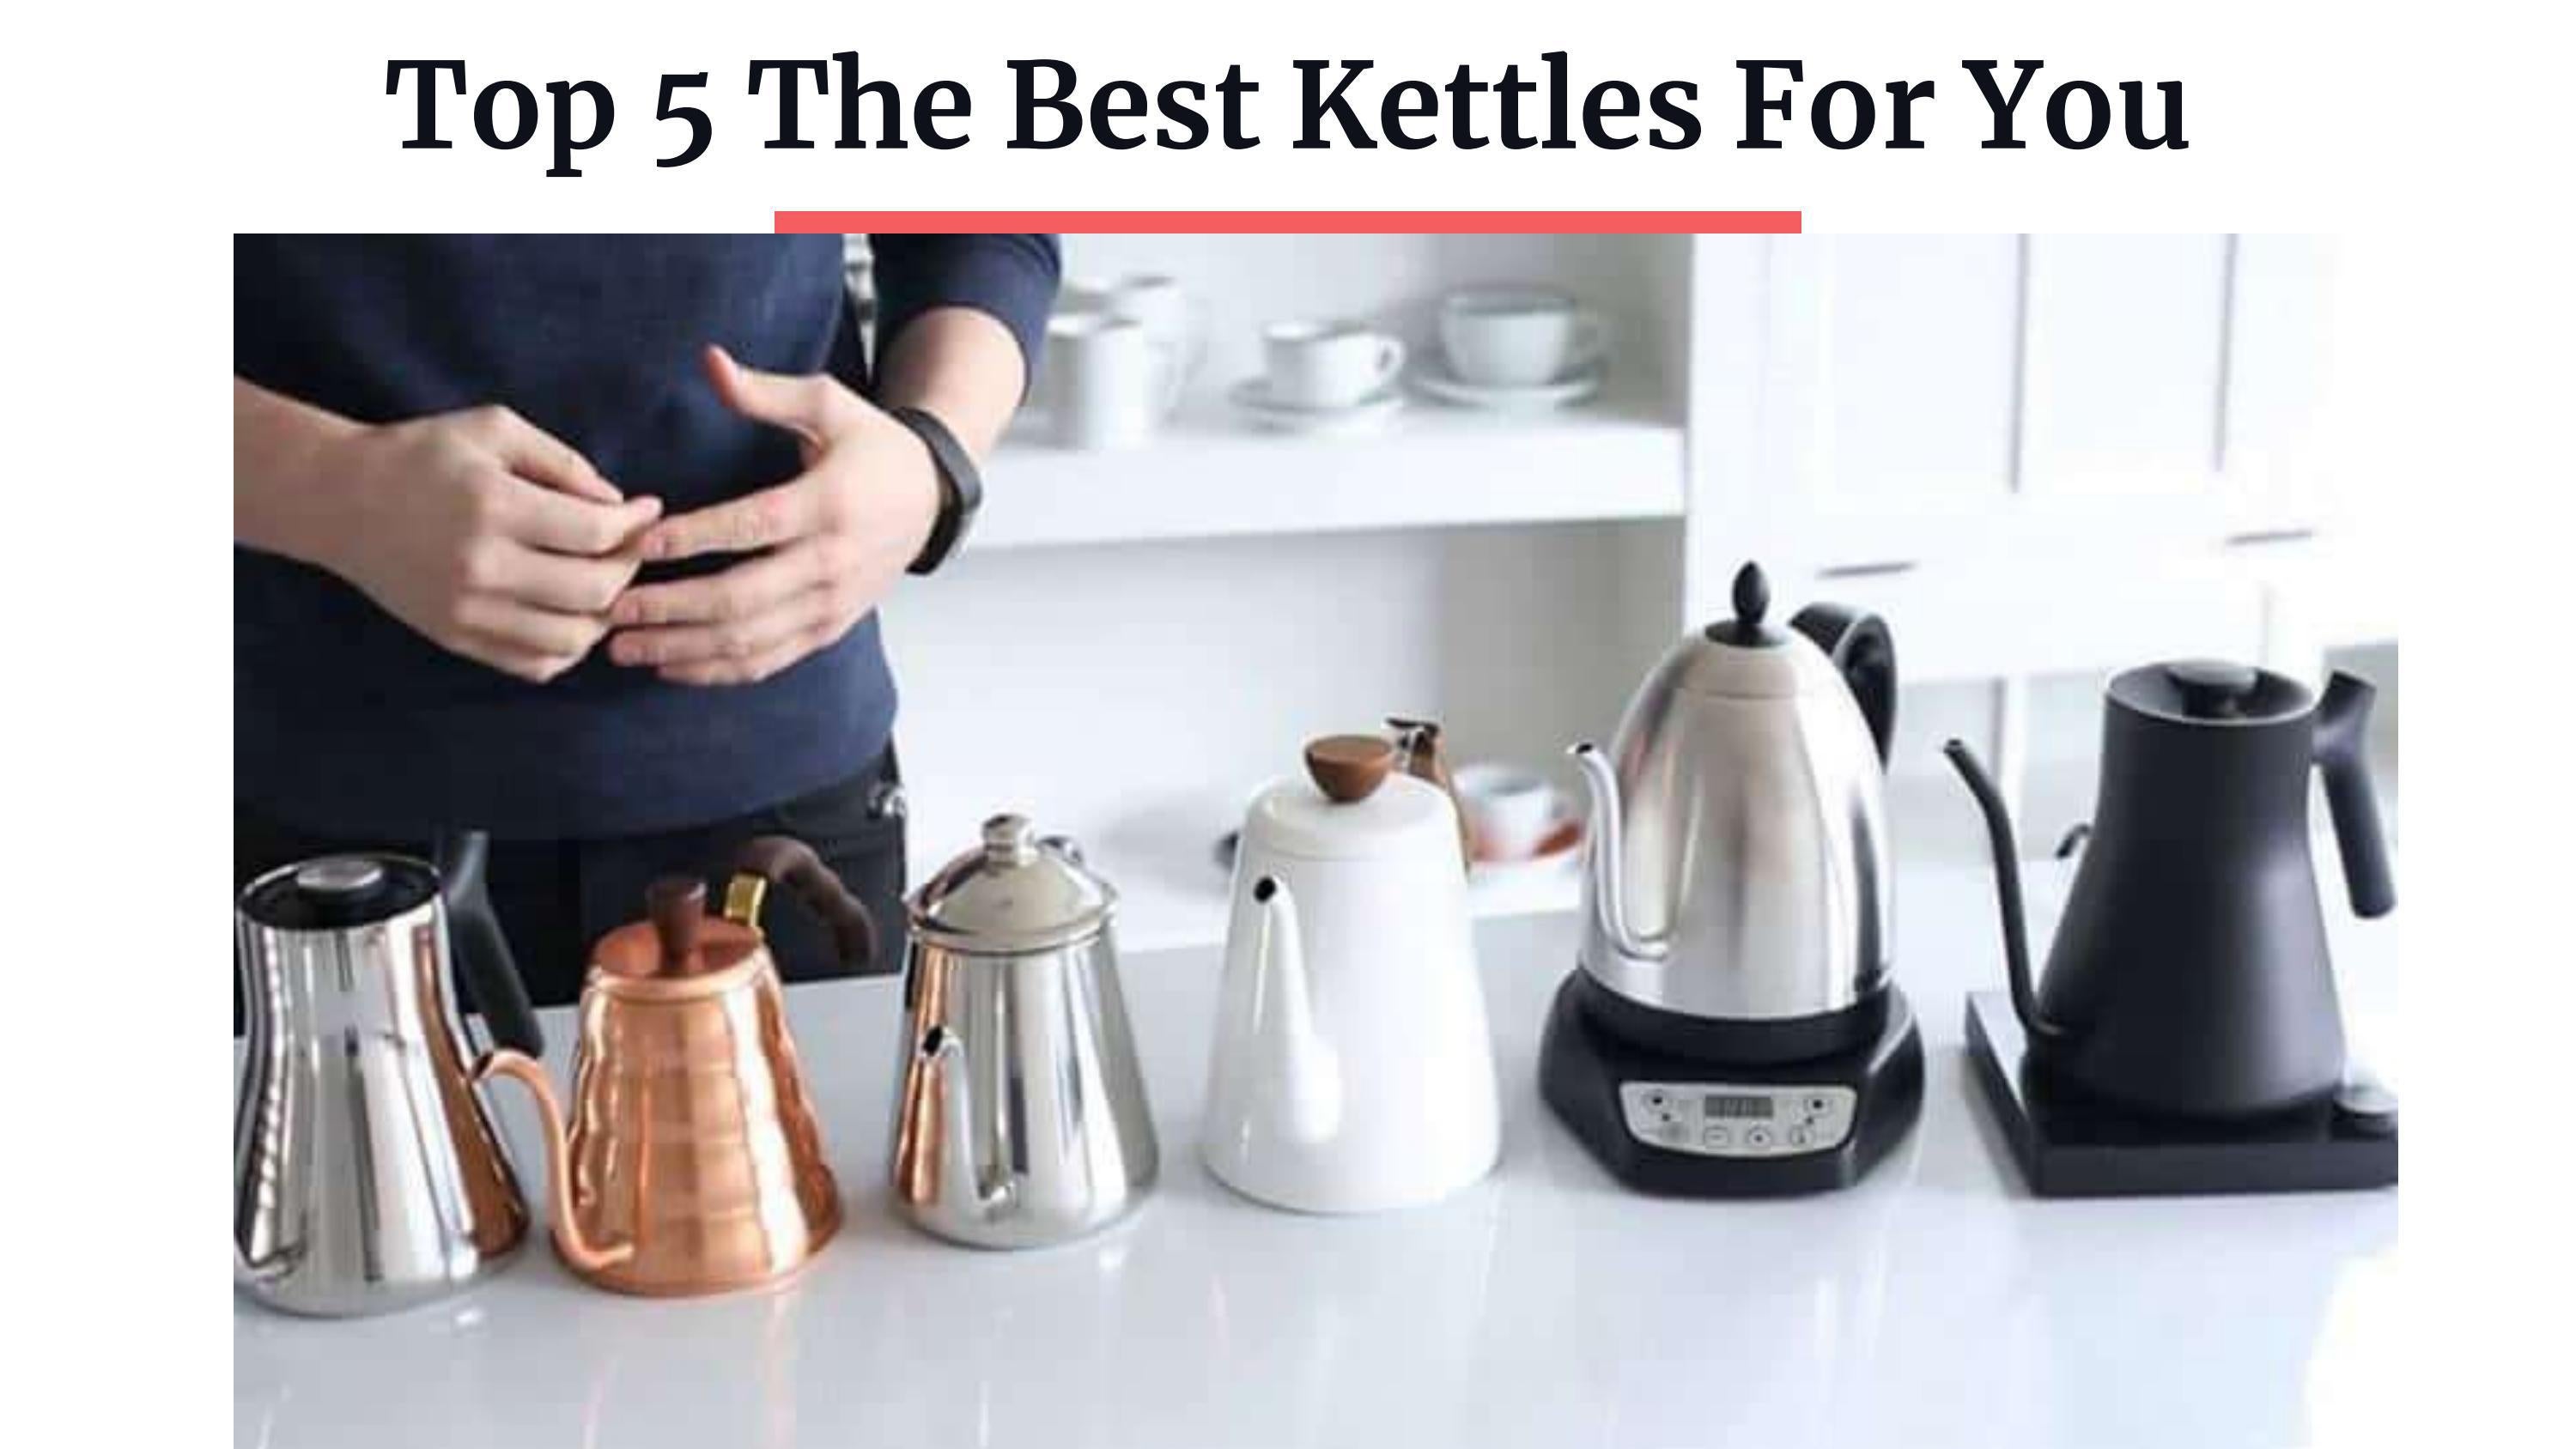 Top 5 The Best Kettles For You